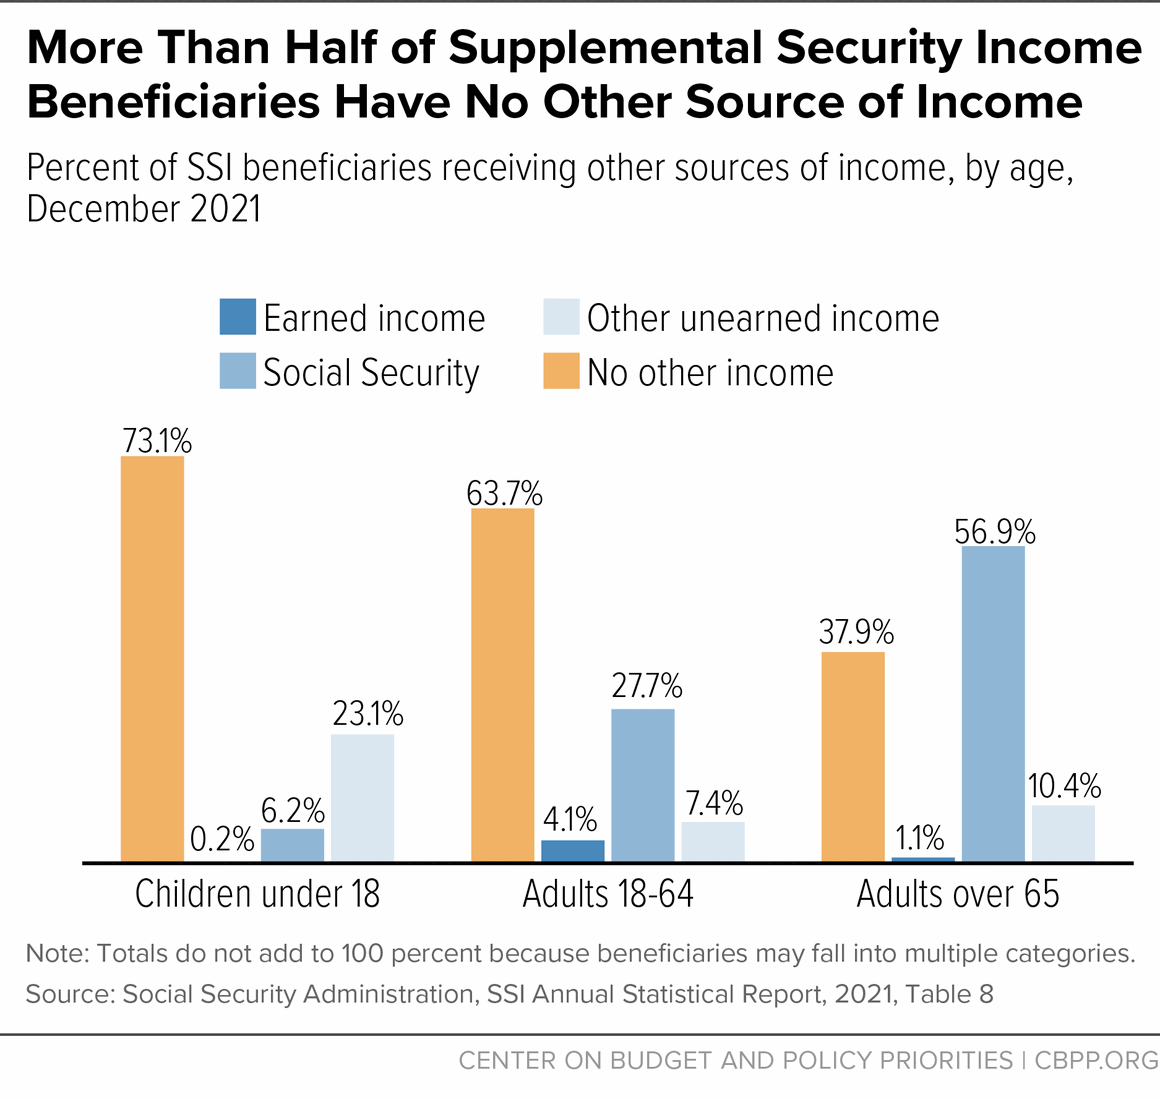 More Than Half of Supplemental Security Income Beneficiaries Have No Other Source of Income